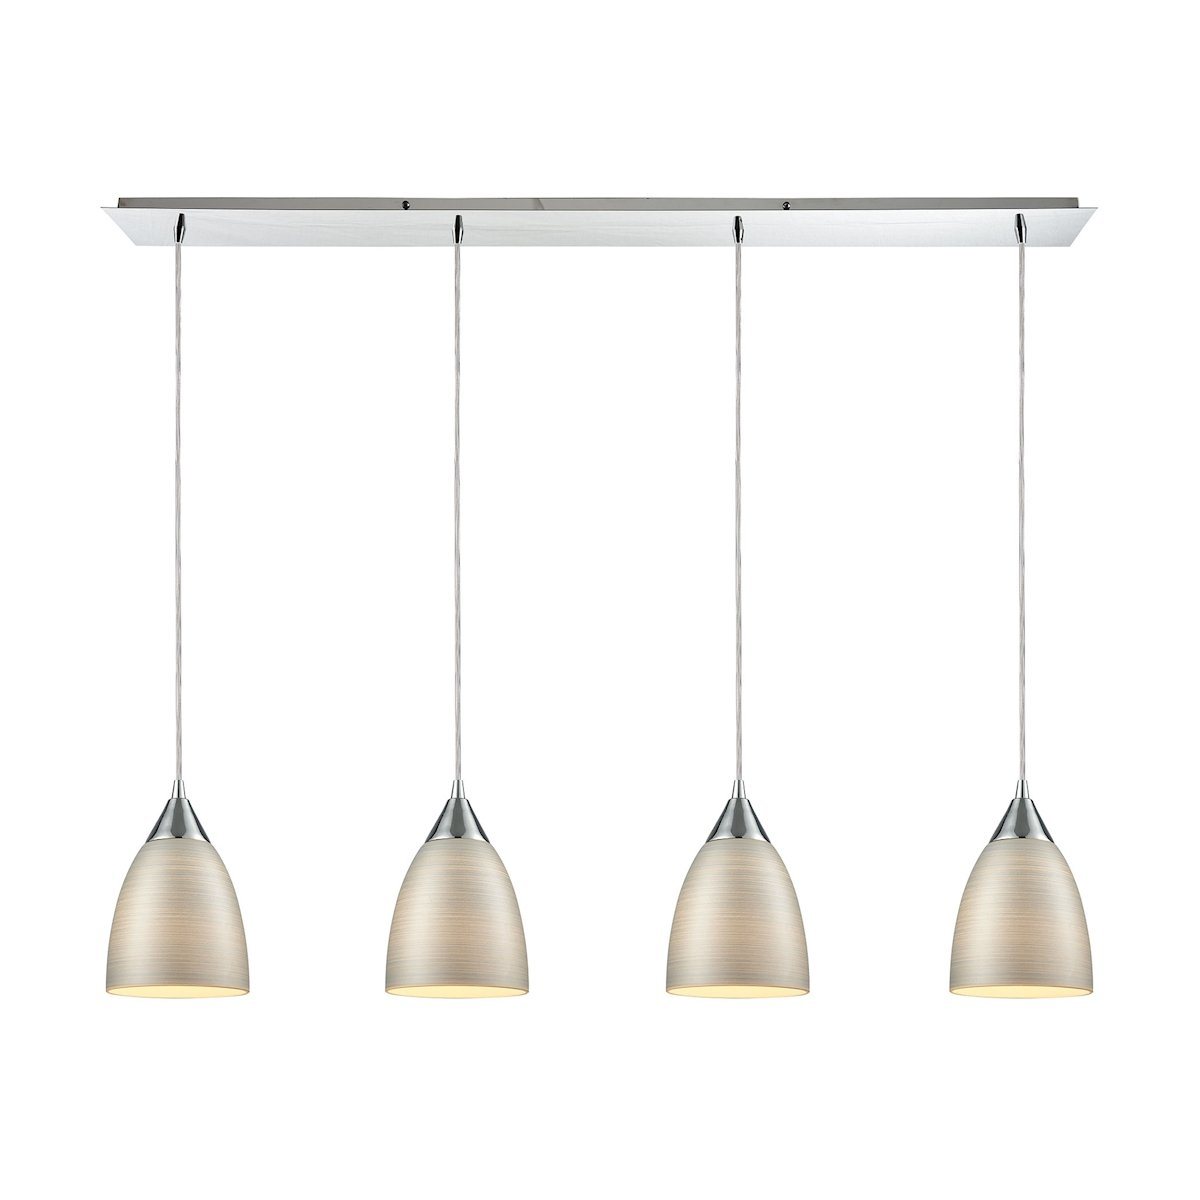 Merida 4 Light Linear Pan Pendant In Polished Chrome With Silver Linen Glass Ceiling Elk Lighting 